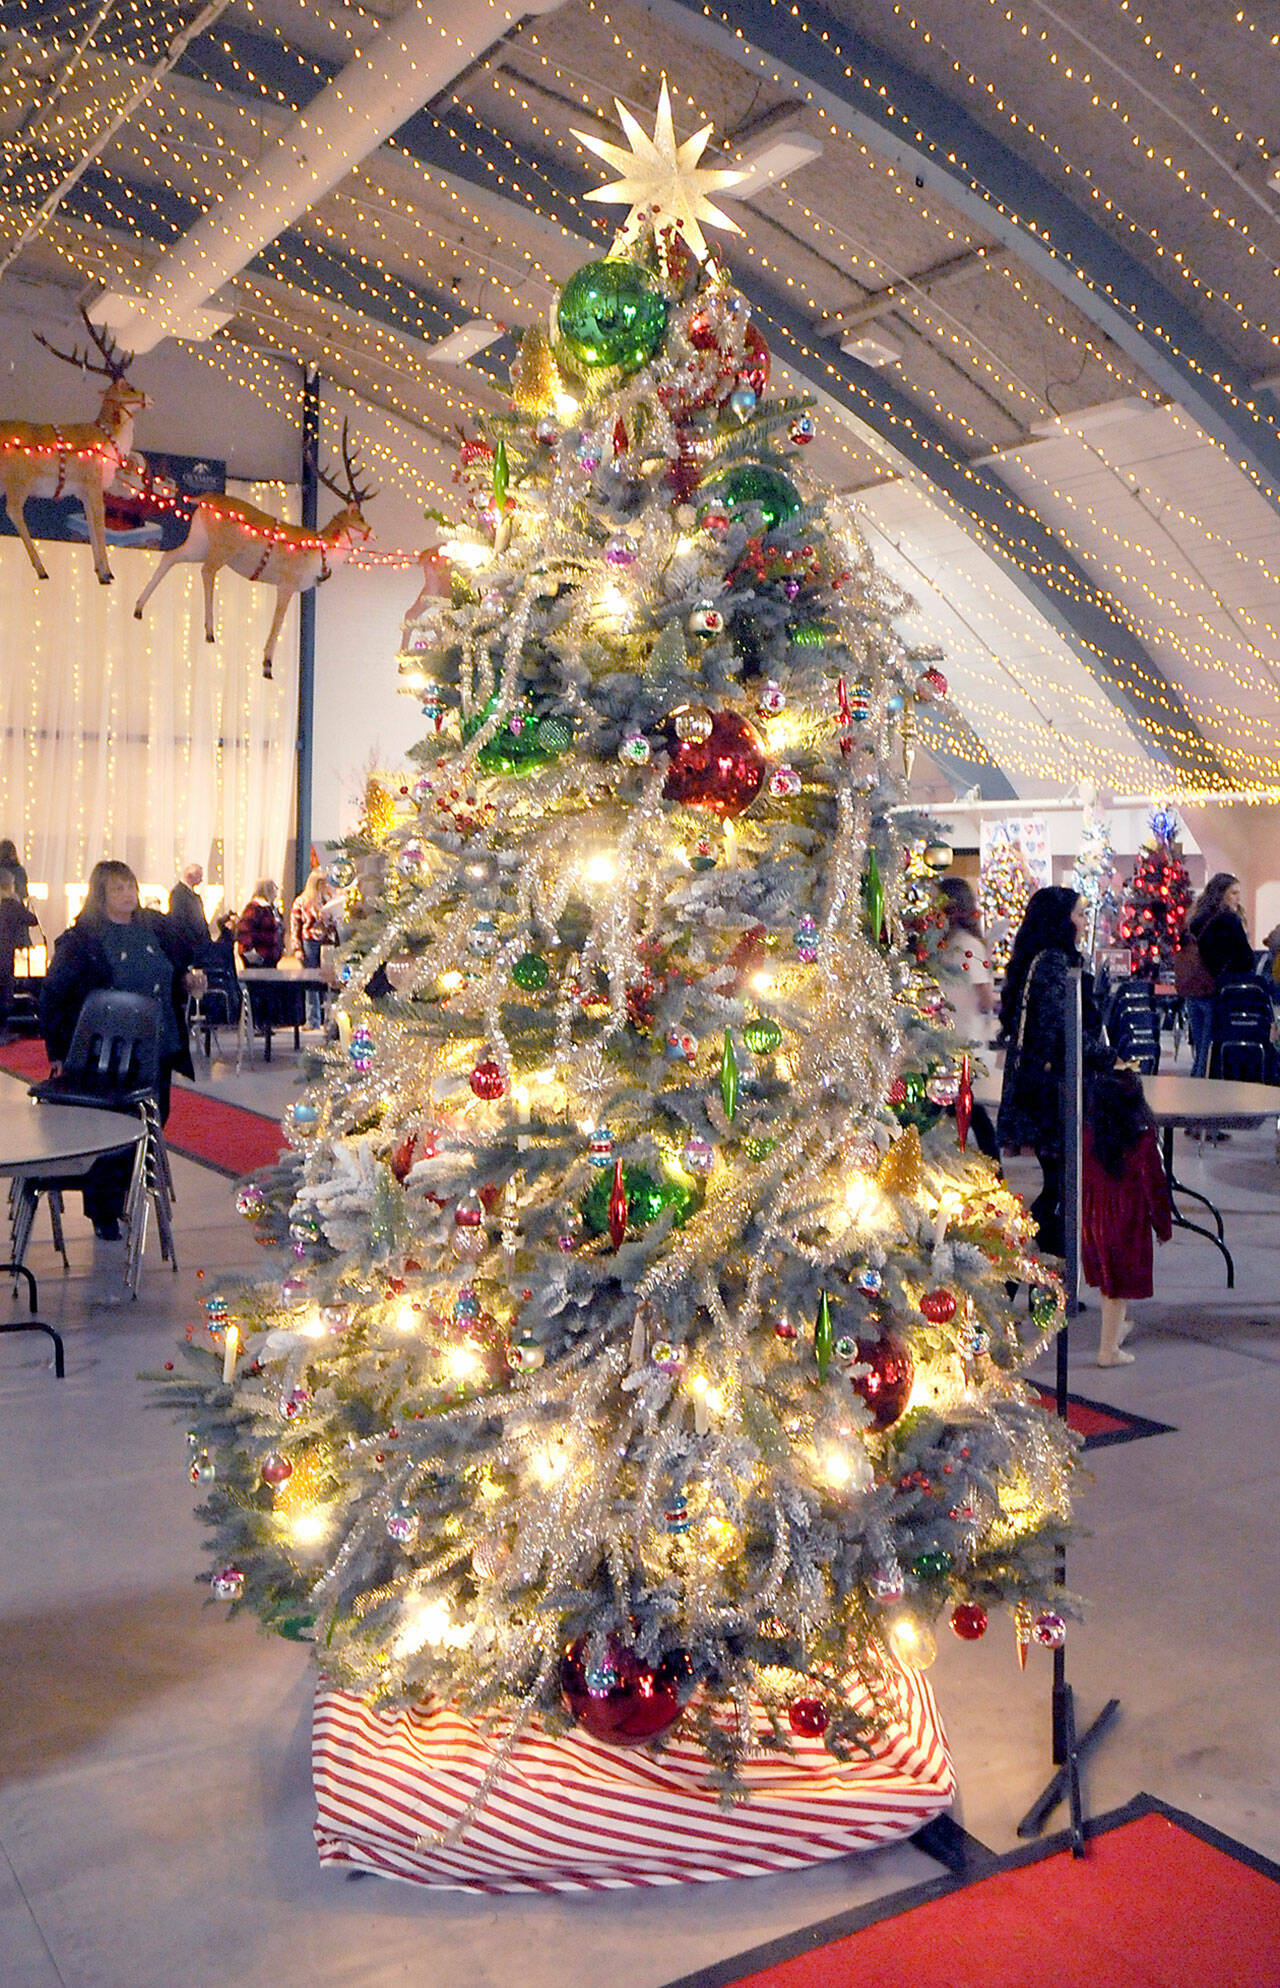 A decorated Christmas tree titled "Take Me Back" stands at Vern Burton Community Center in Port Angeles on Saturday after fetching the top bid of $7,500 offered by the Jamestown S'Klallam Tribe during Saturday night's Festival of Trees gala auction. The tree, designed by Staci Politik and sponsored by Applebee's Restaurant, included a $2,000 premium gift certificate for home furnishings from Angeles Furniture. More than 40 trees were auctioned off on Friday as a benefit for the Olympic Medical Center Foundation. (Keith Thorpe/Peninsula Daily News)